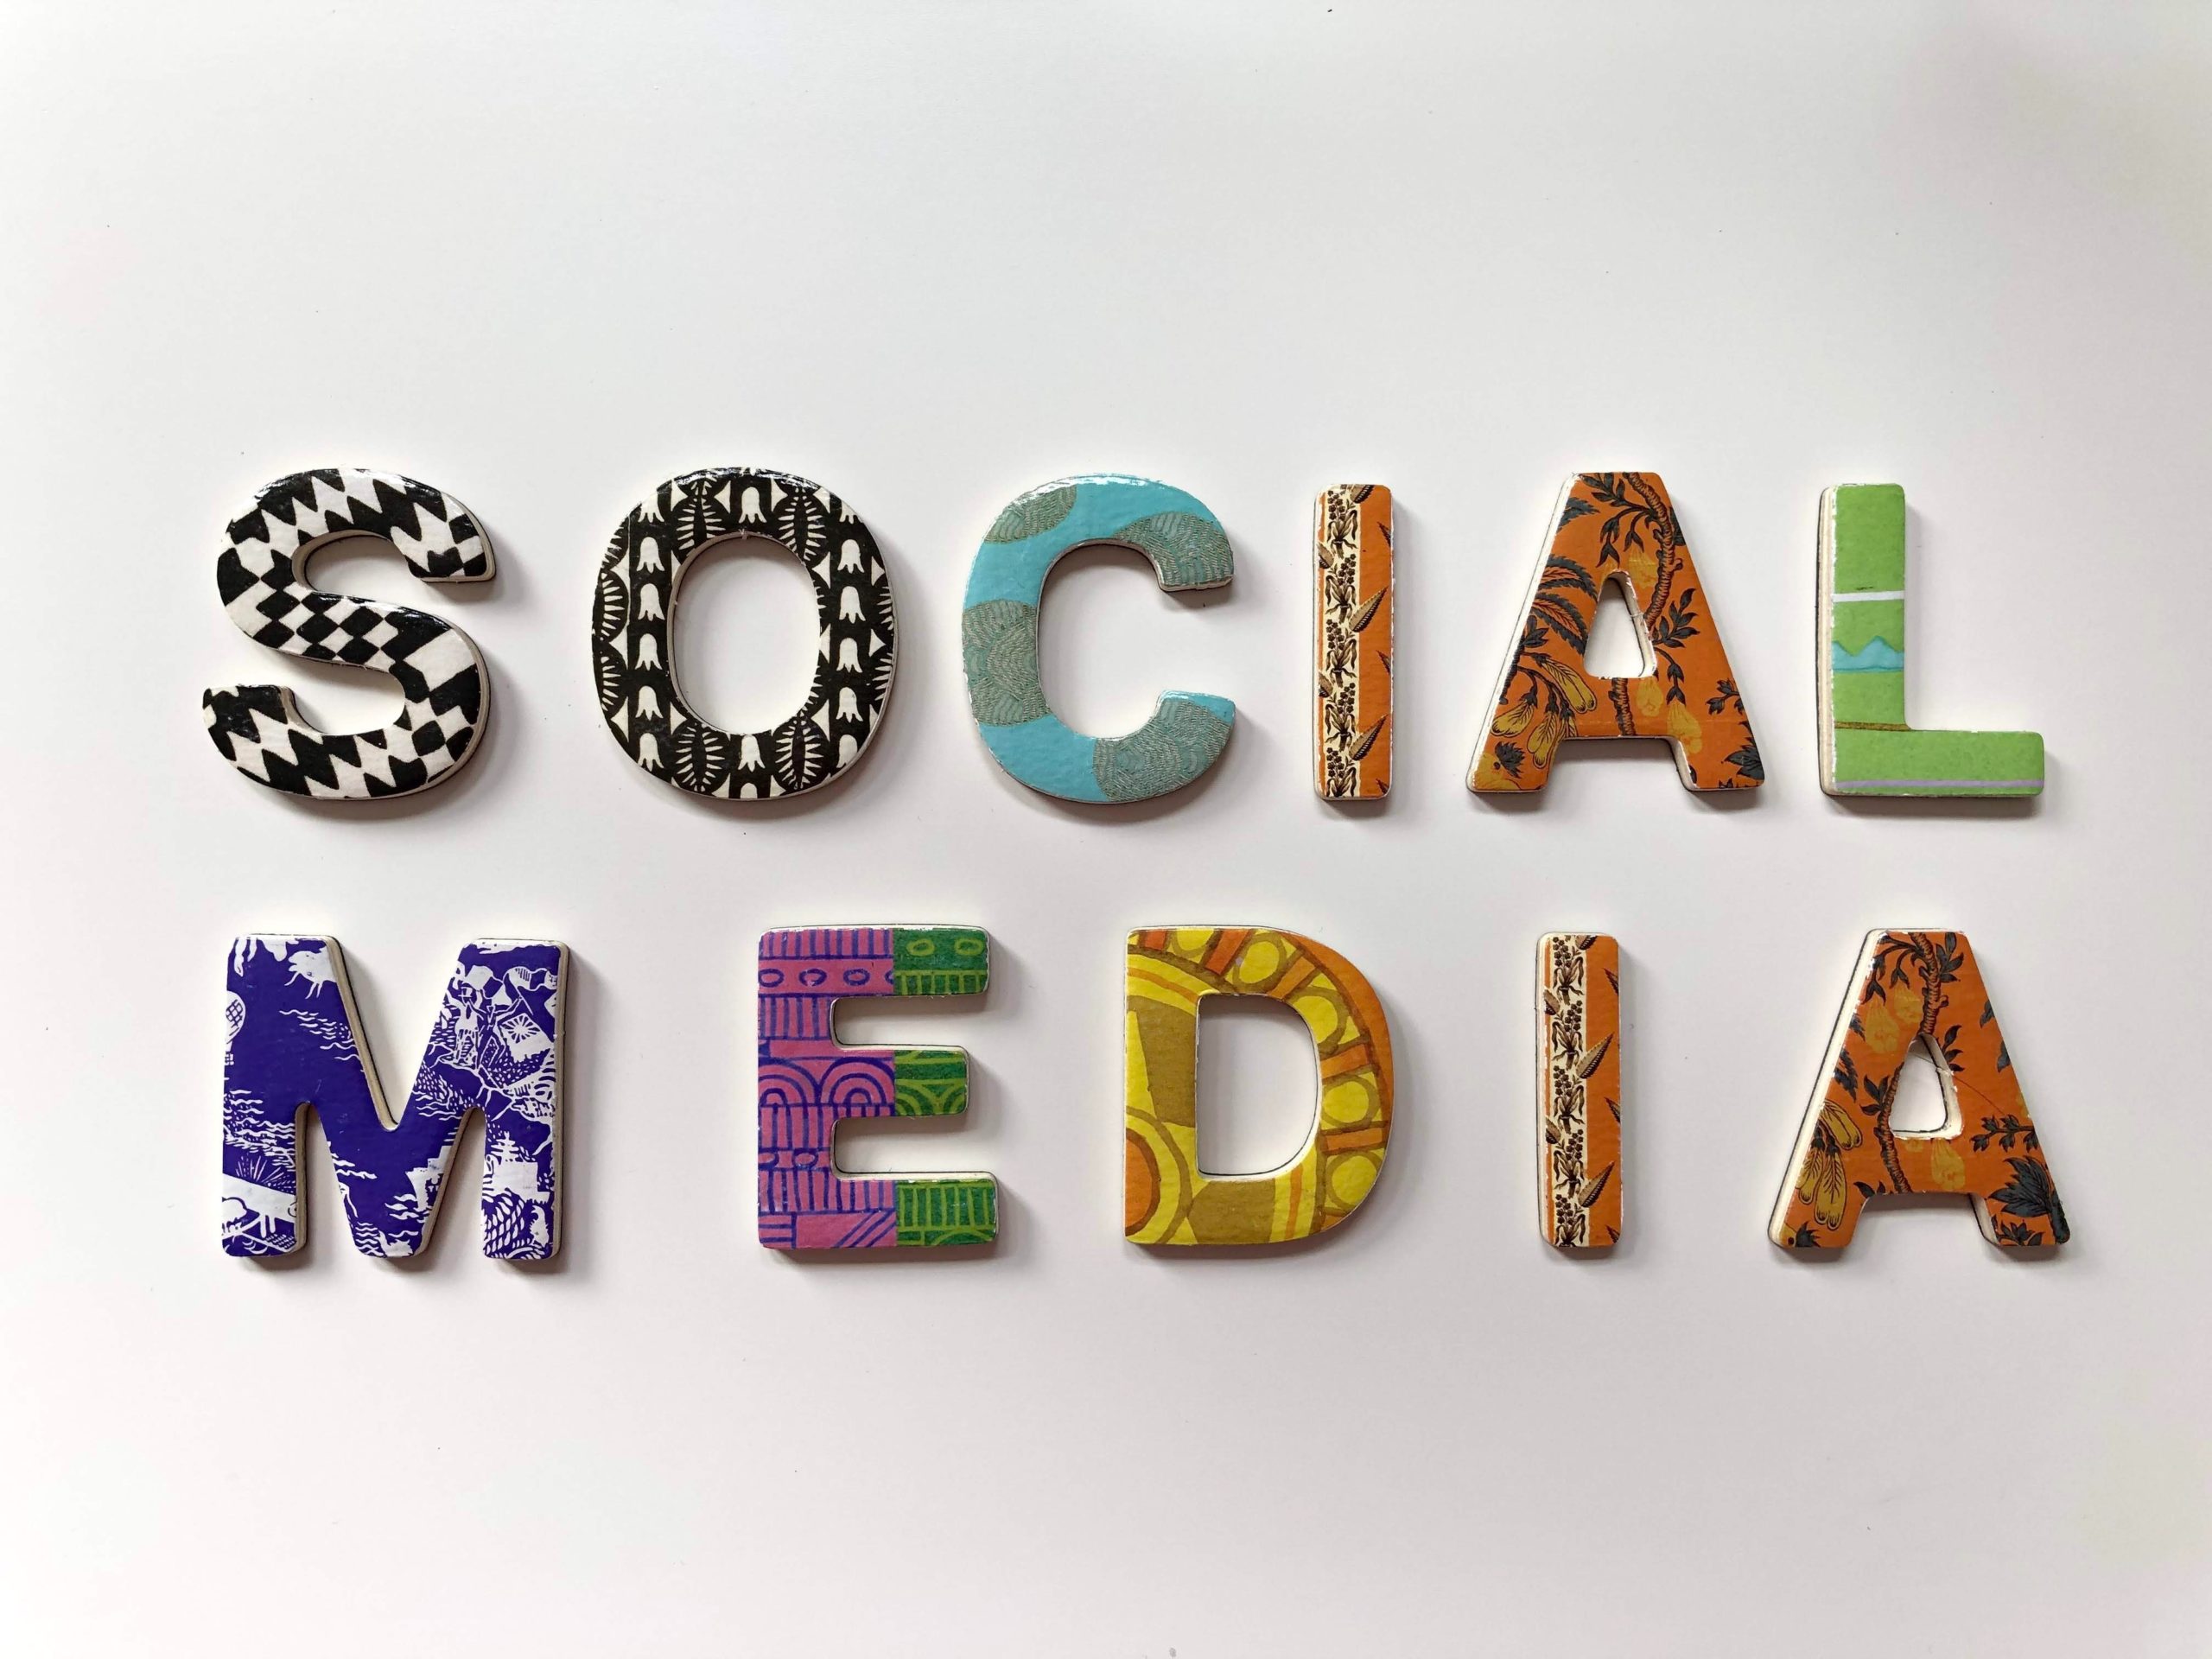 The Importance of Social Media as a Marketing Tool in 2020